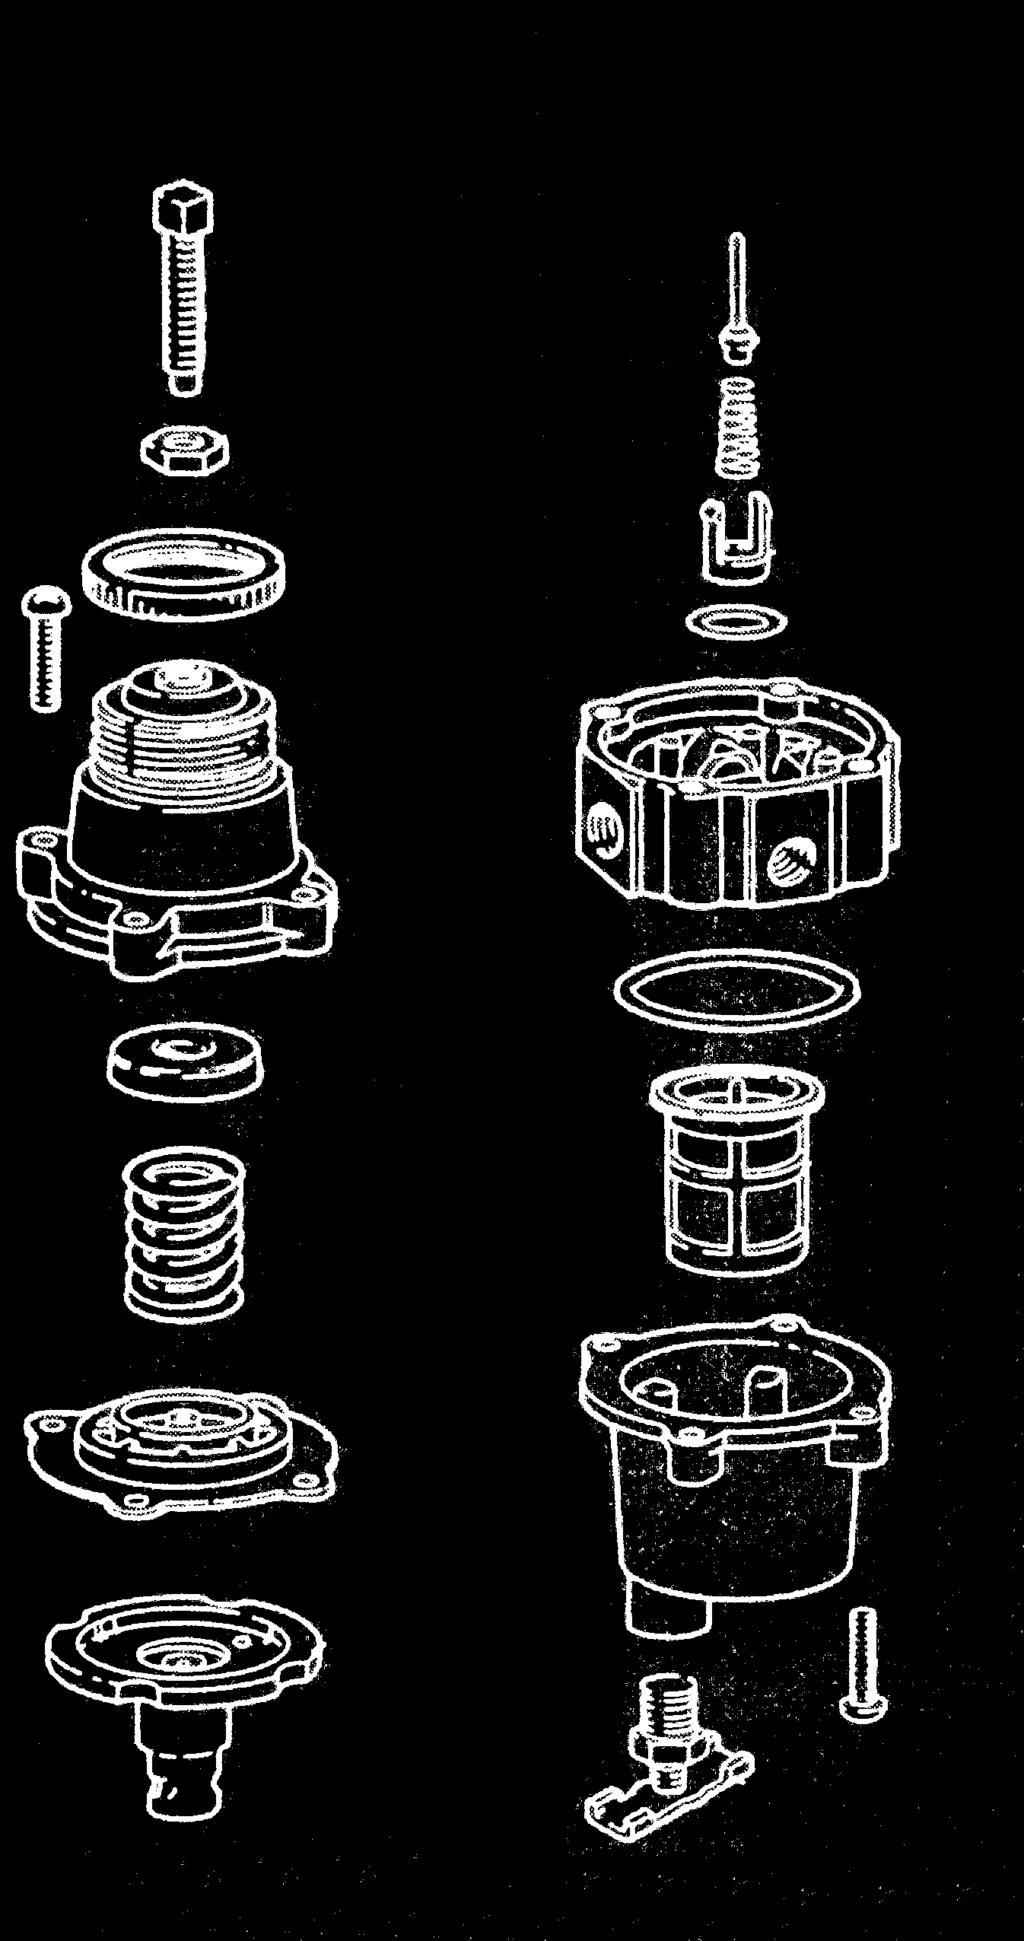 *Complete diaphragm 9 Housing, journal bearing 10 * Plug 11 * Conical spring 12 Spring fastener 13 * O-ring 14 Connection block